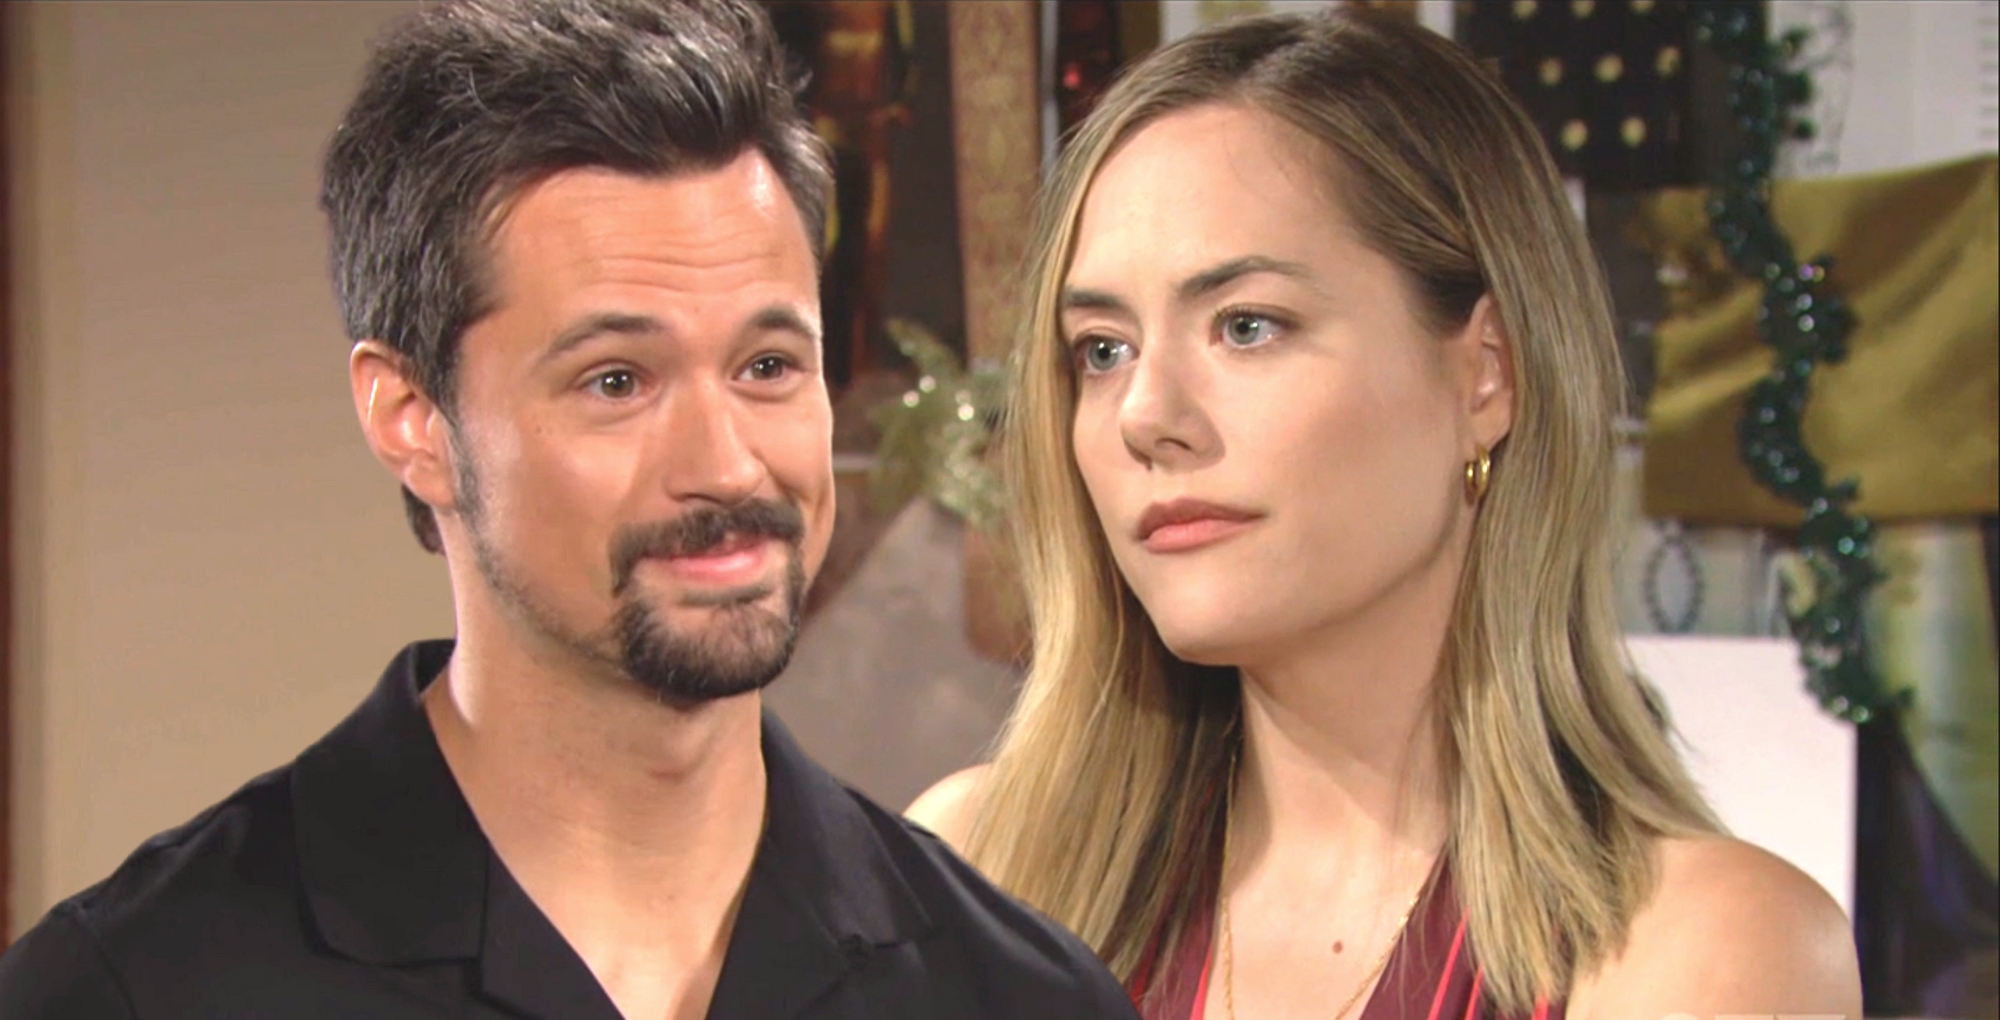 Should B&B's Hope Logan Give Love A Try With Thomas?